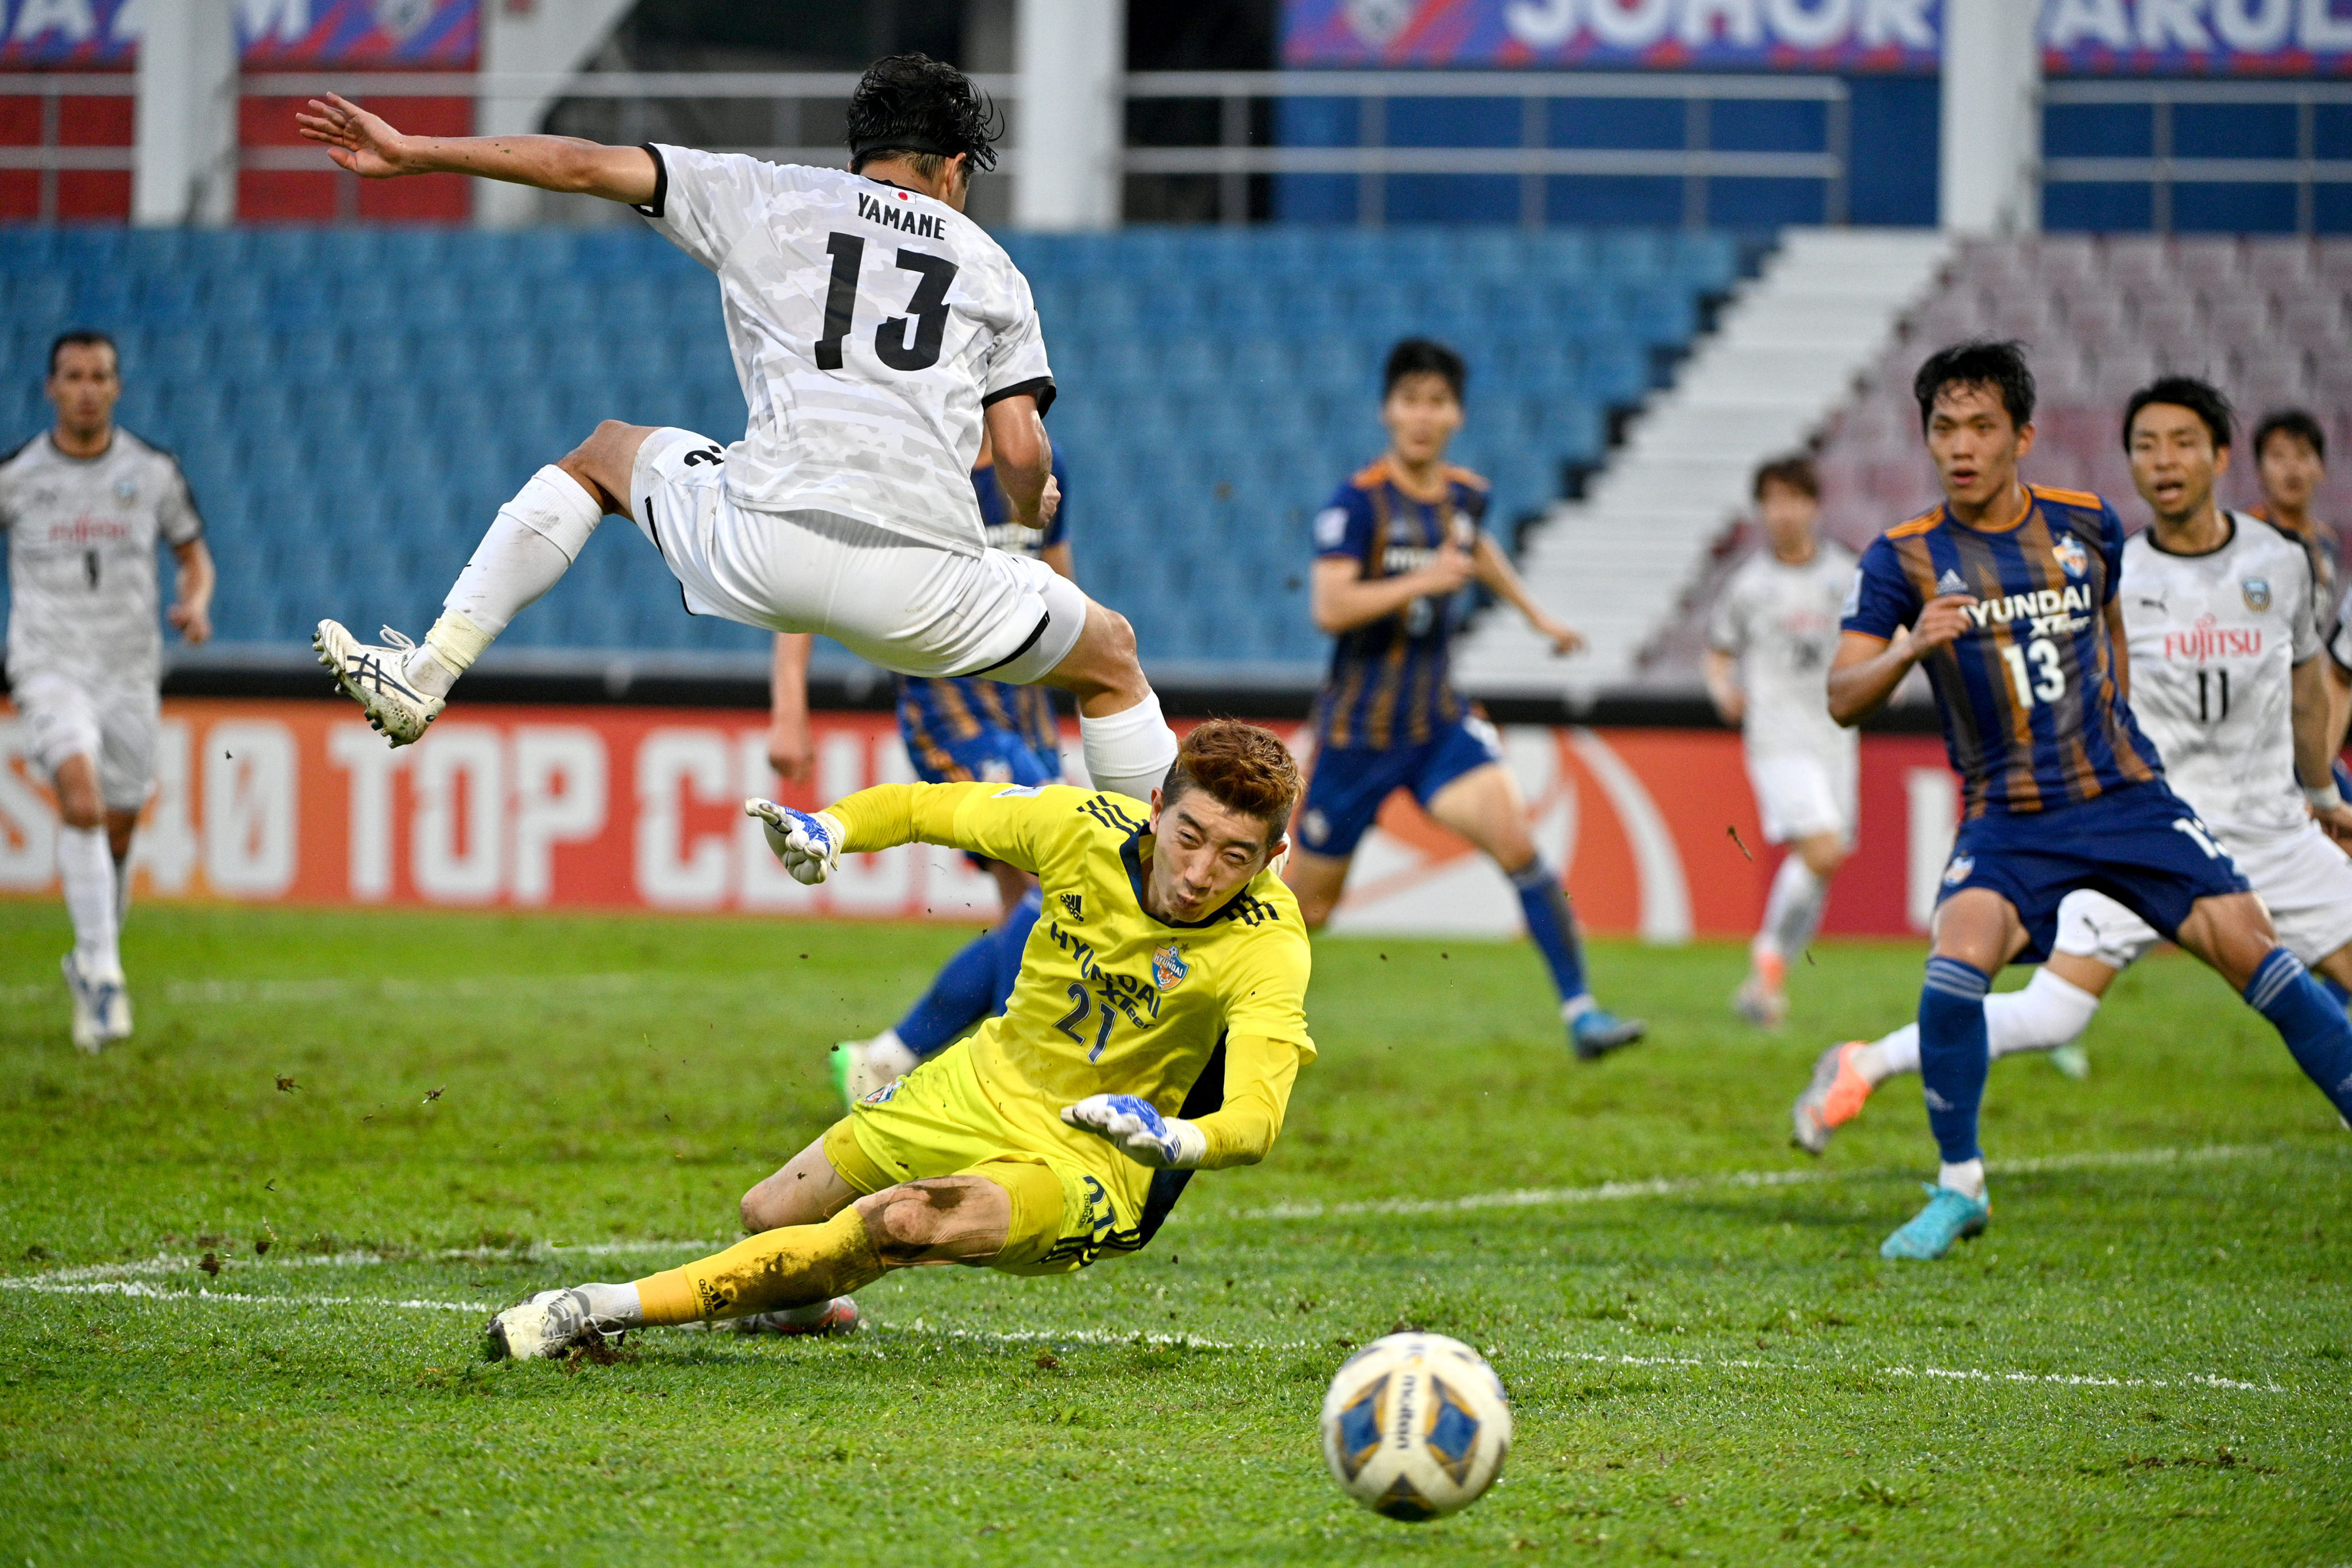 Ulsan Hyundai goalkeeper Jo Hyeonwoo attempts to stop a cross during his side’s game against Kawasaki Frontale on April 27. Both sides have been eliminated from the AFC Champions League. Photo: Xinhua